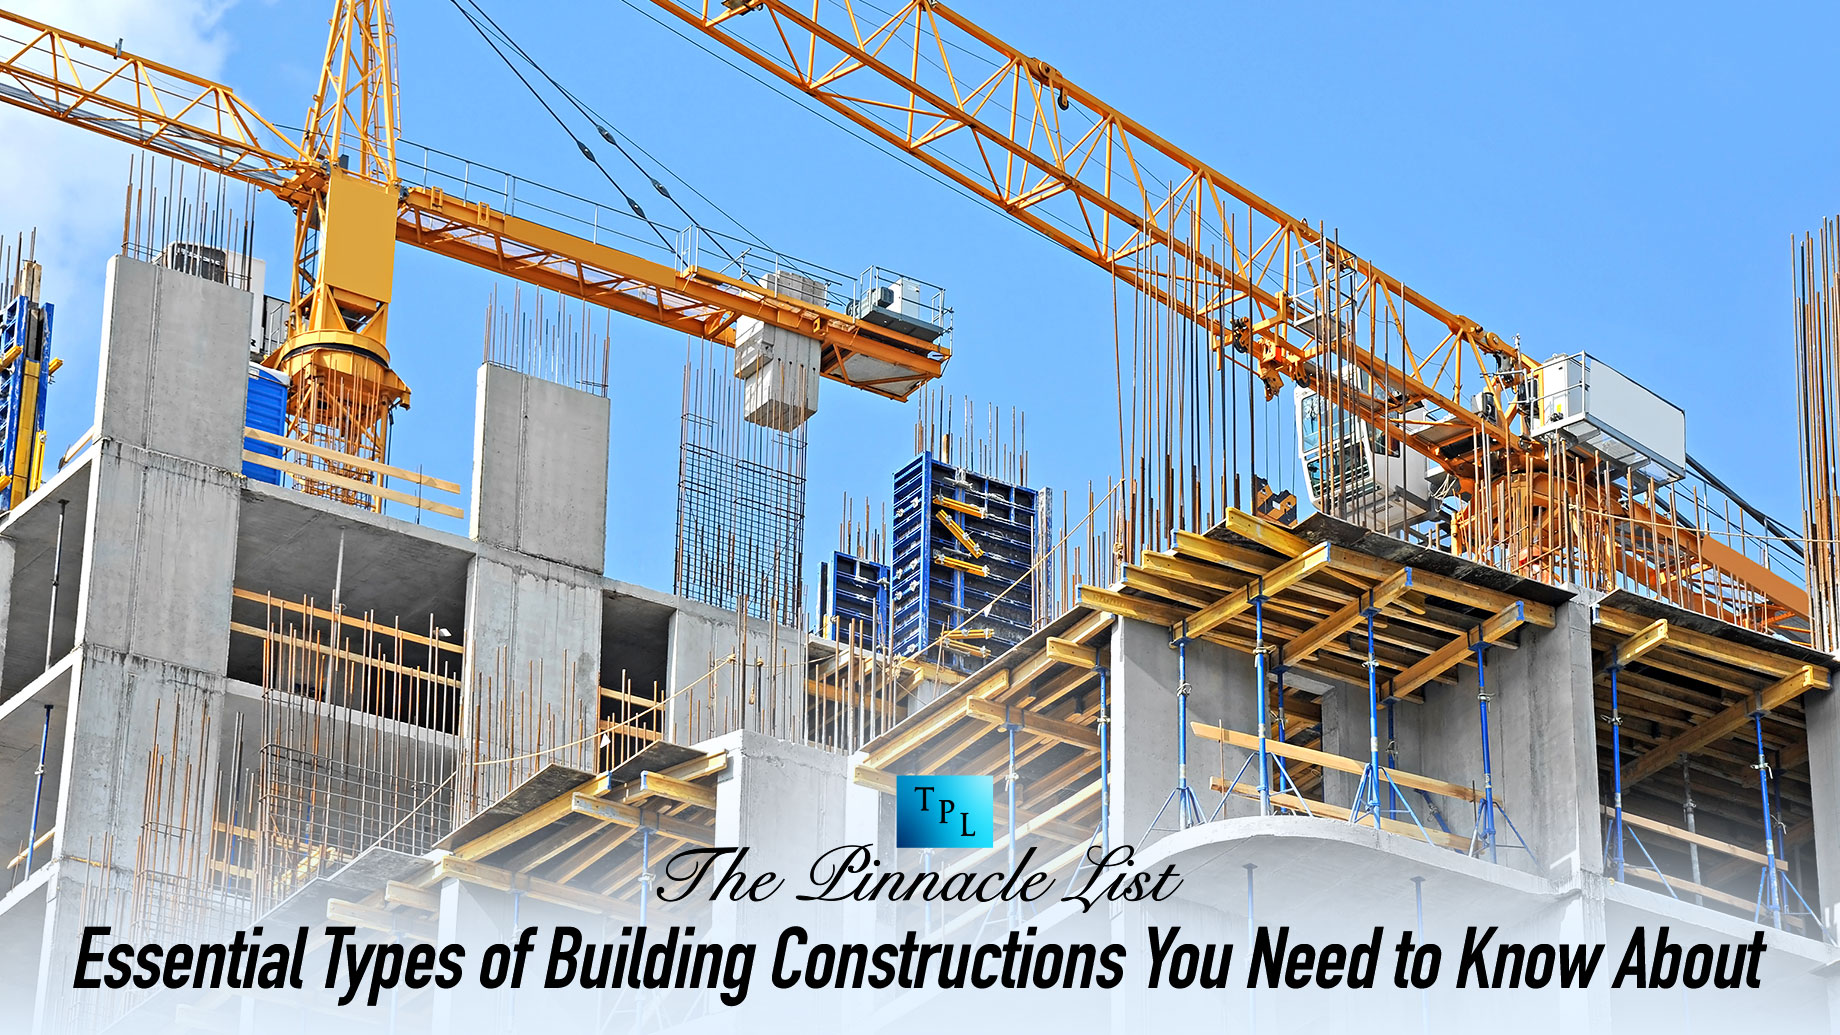 Essential Types of Building Constructions You Need to Know About